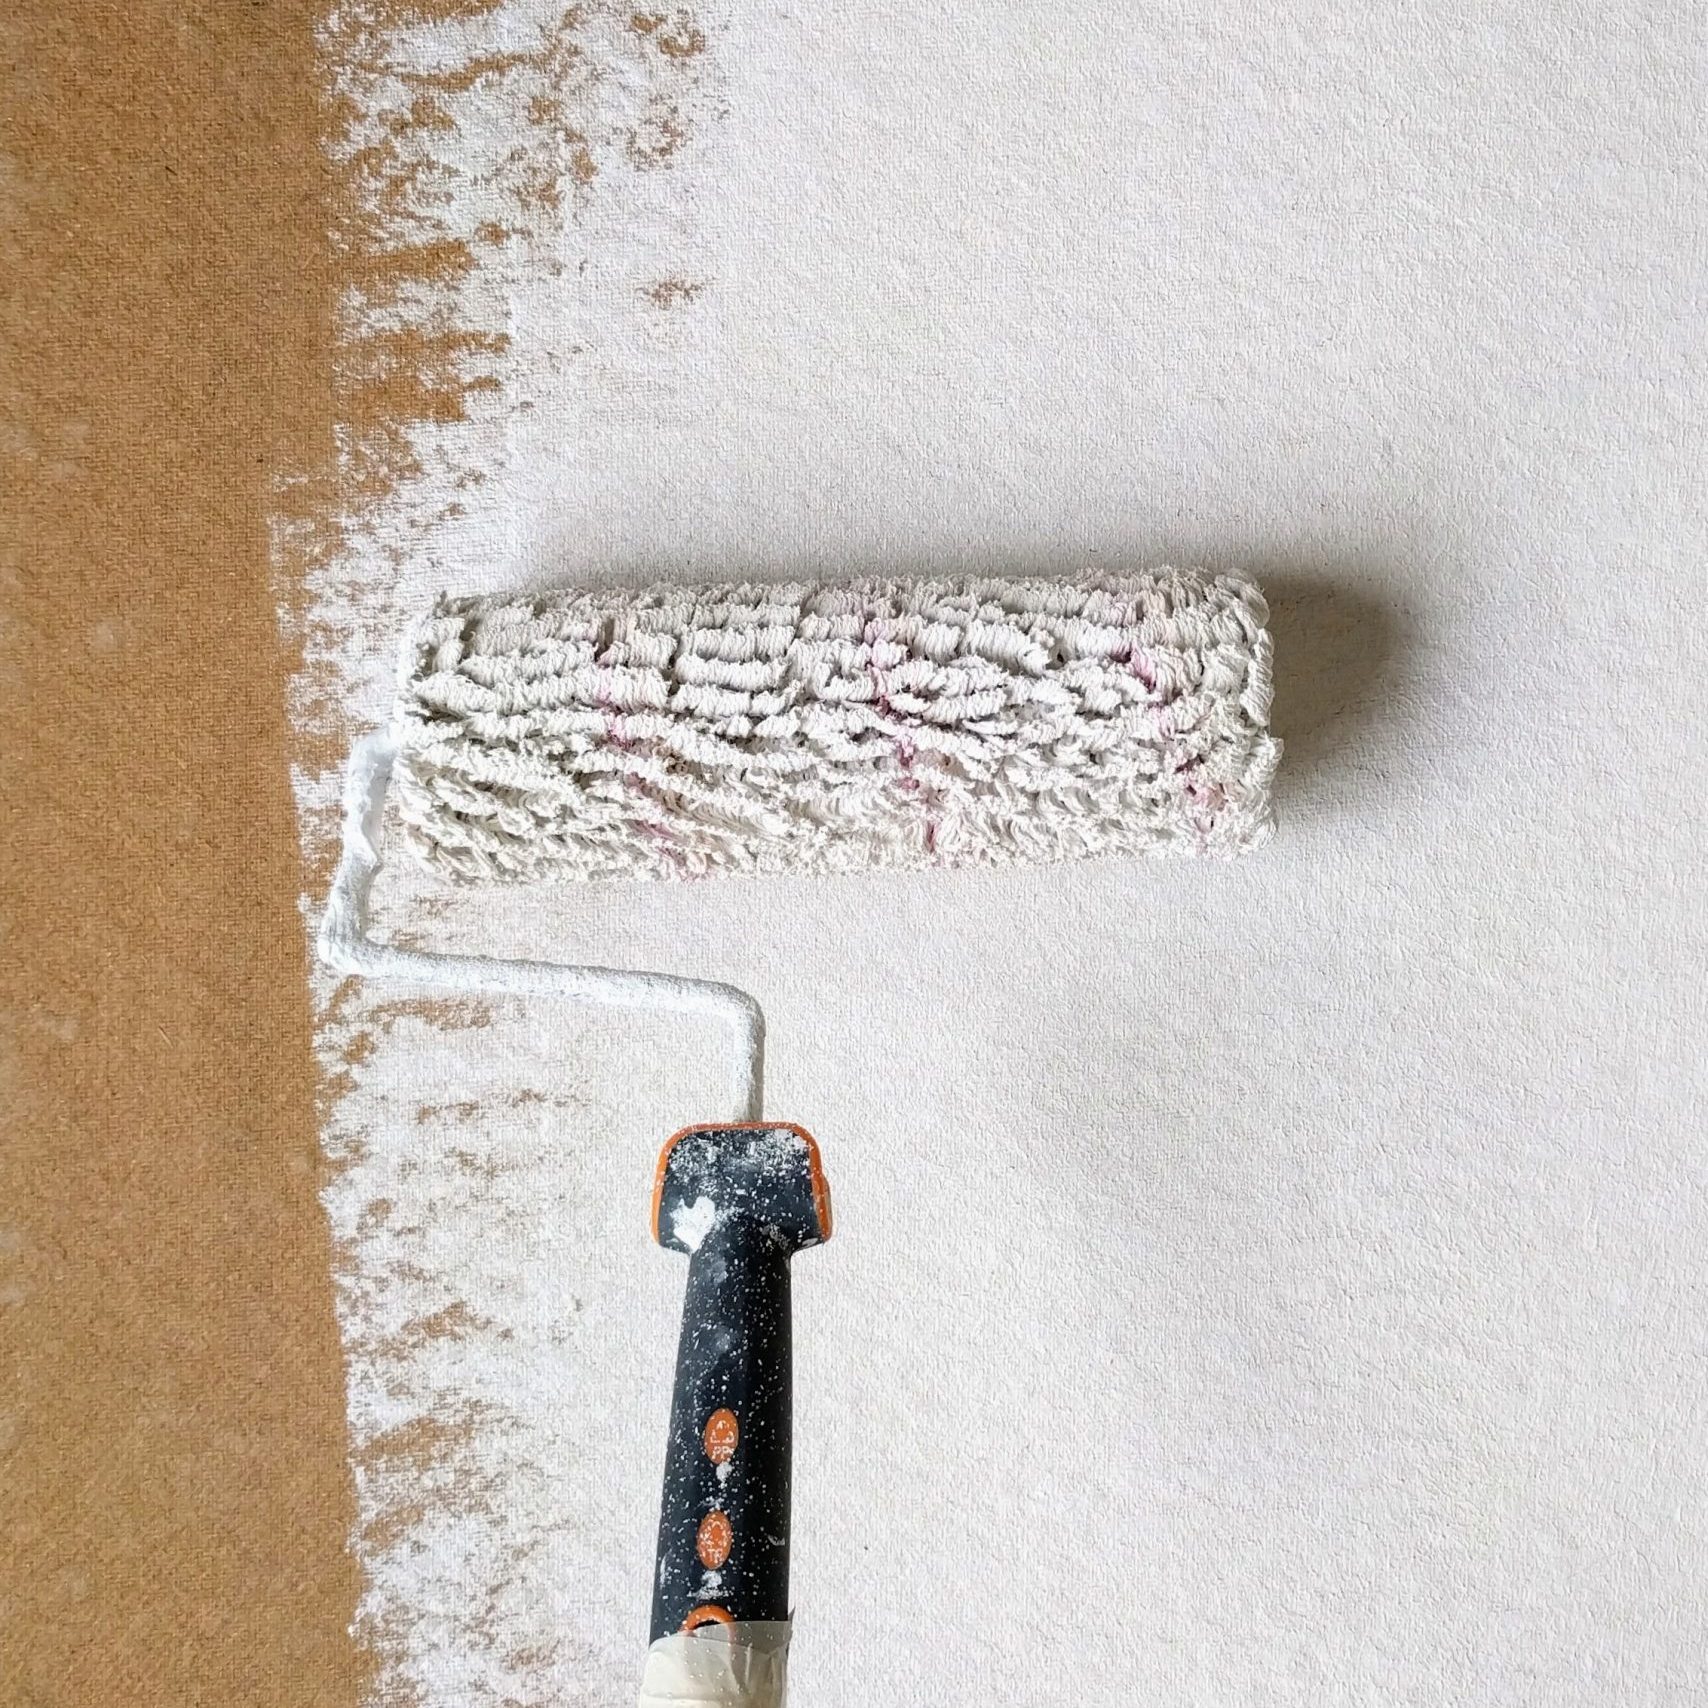 Polyester Roller Brush Kit, Rollers Painting Walls